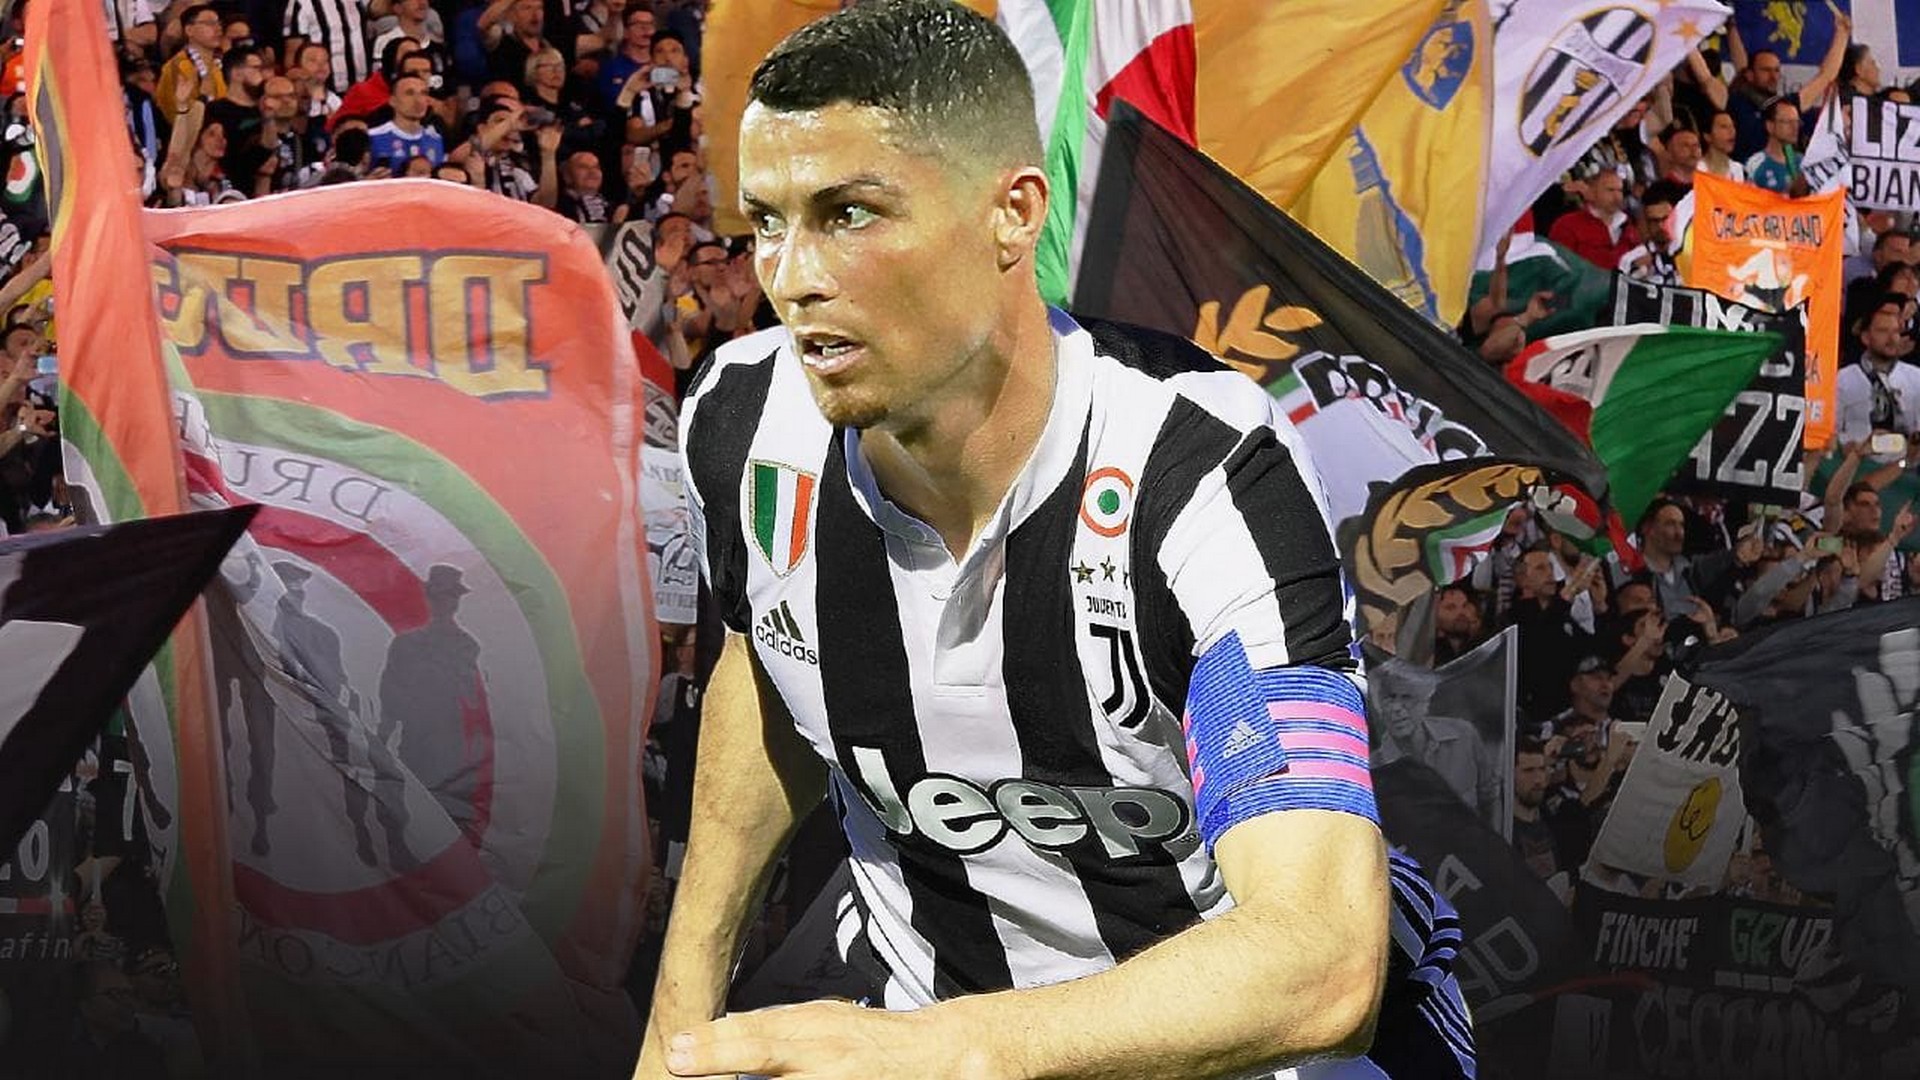 C Ronaldo Juventus Wallpaper HD With Resolution 1920X1080 pixel. You can make this wallpaper for your Desktop Computer Backgrounds, Mac Wallpapers, Android Lock screen or iPhone Screensavers